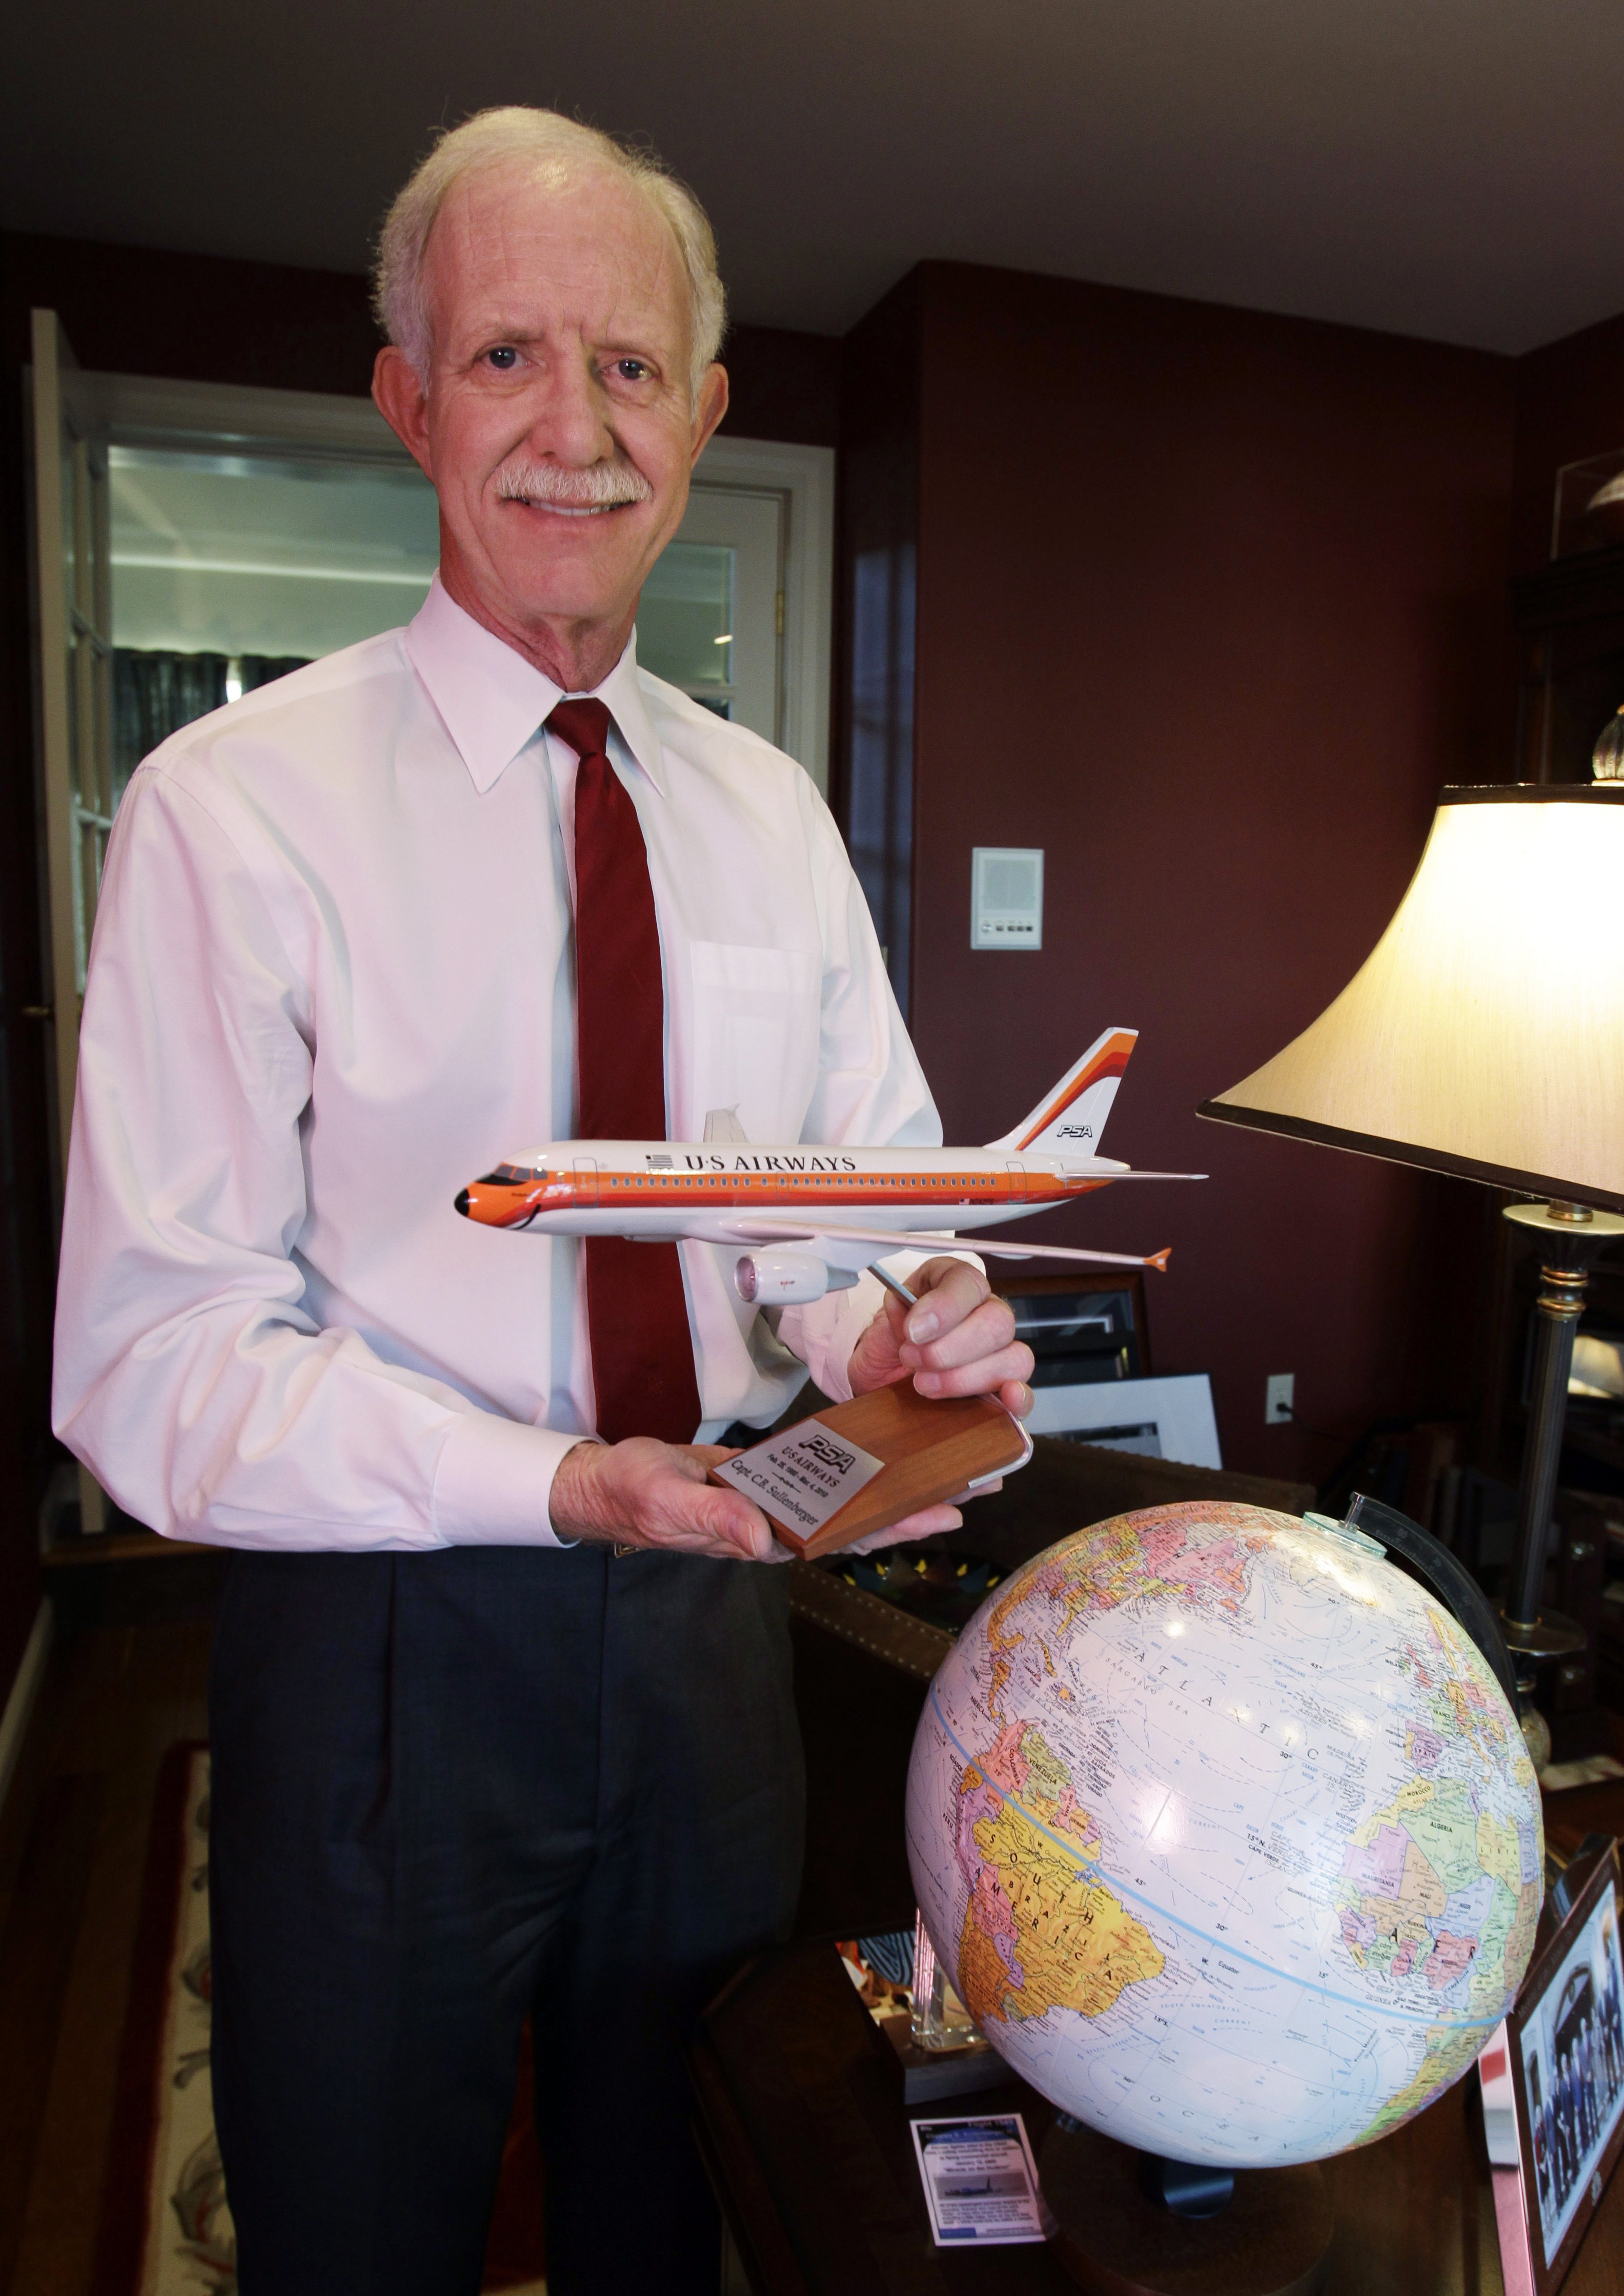 Chesley "Sully" Sullenberger captain of the US Airways flight #5149 that landed in New York's Hudson River in 2009, poses in his office at his home in Danville, Calif on Jan. 10. 2011. (Paul Sakuma—AP)